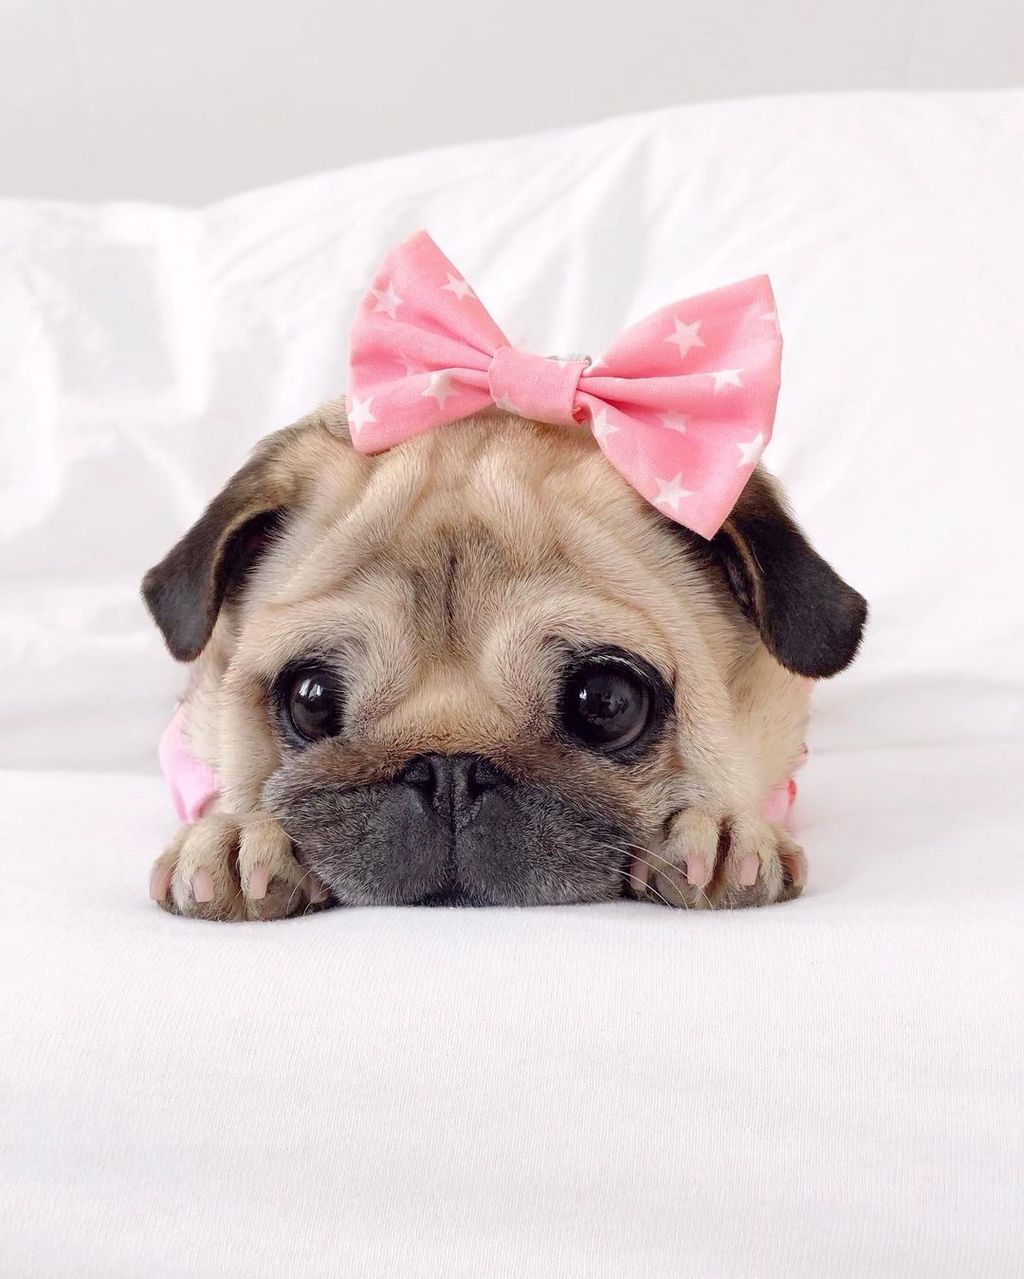 Forrás: Instagram/Loulou the Pug